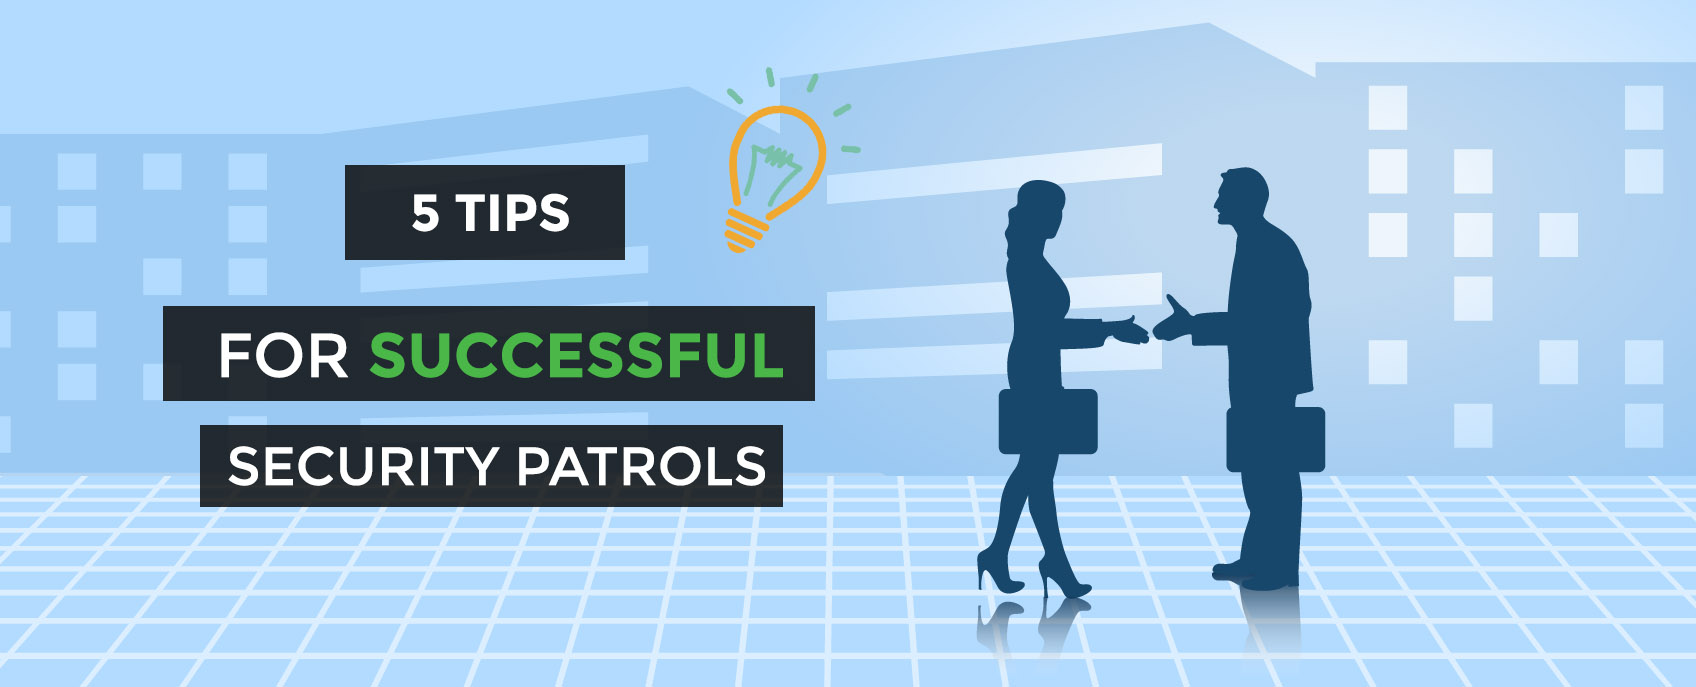 5 tips for successful security patrols